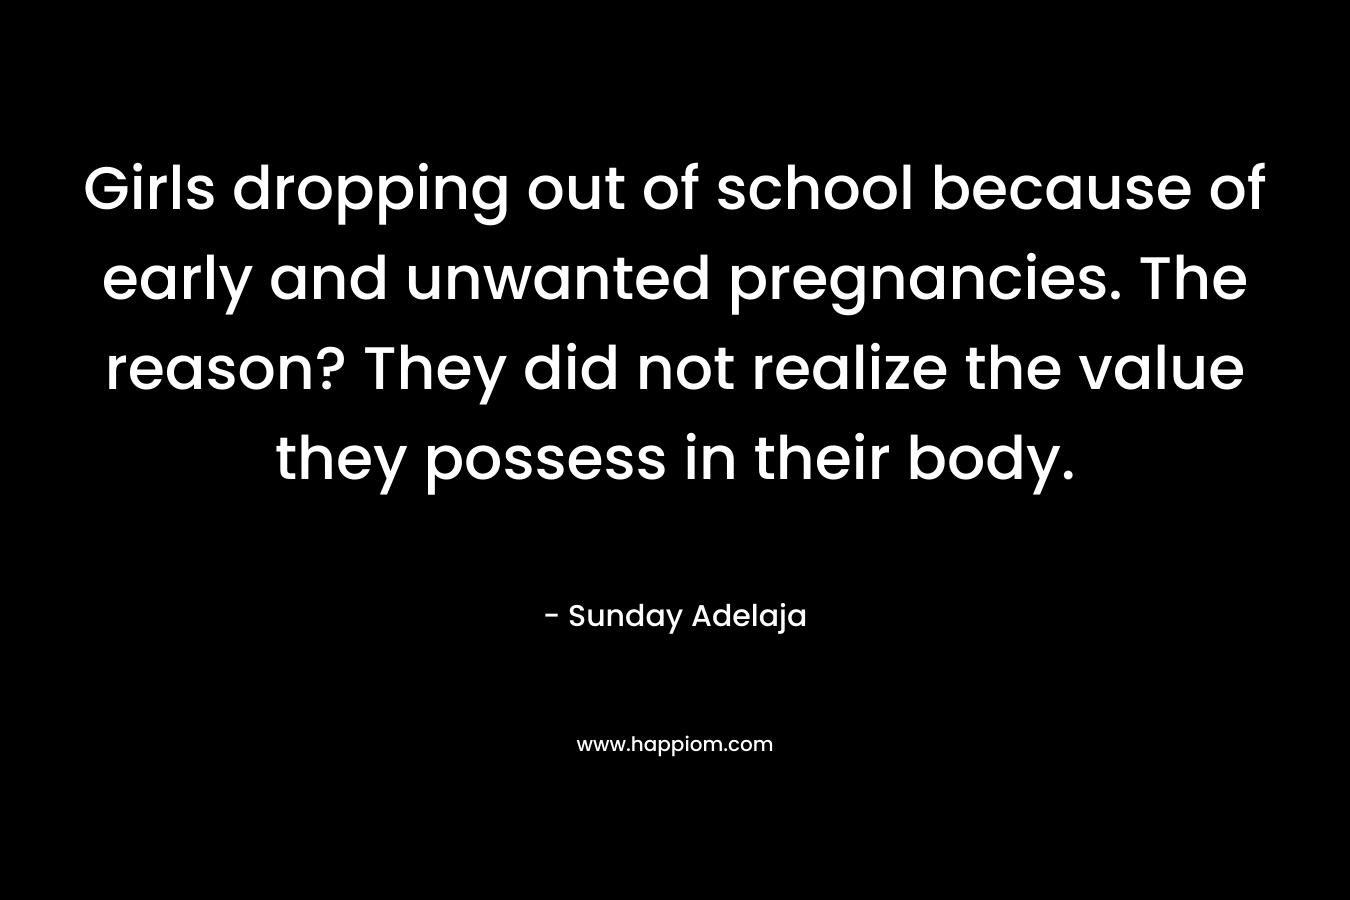 Girls dropping out of school because of early and unwanted pregnancies. The reason? They did not realize the value they possess in their body.